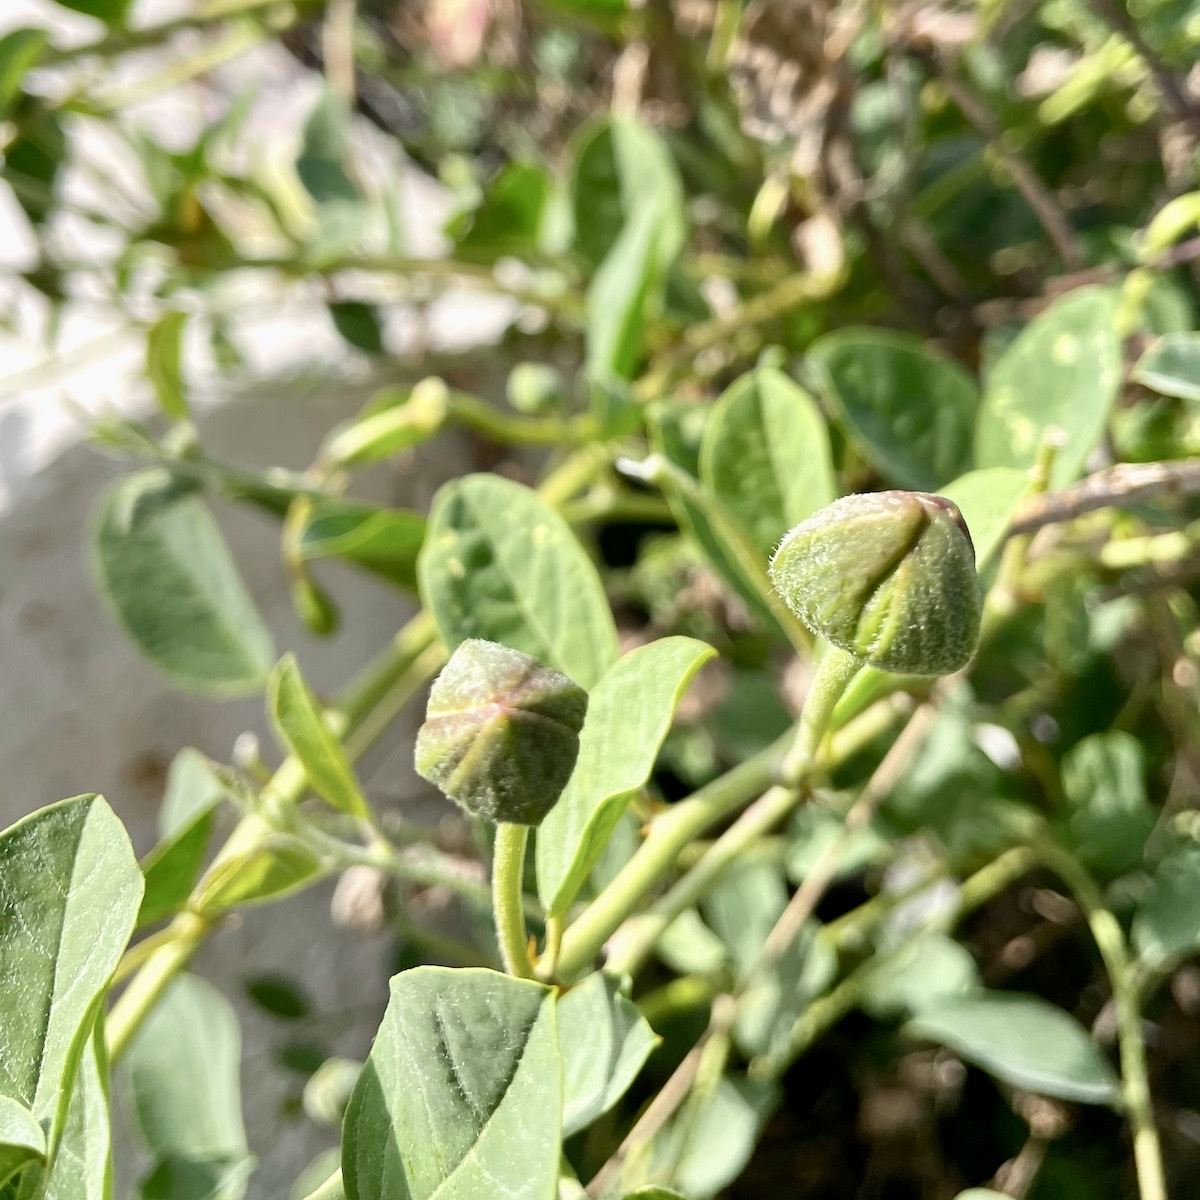 Capers growing on a bush.